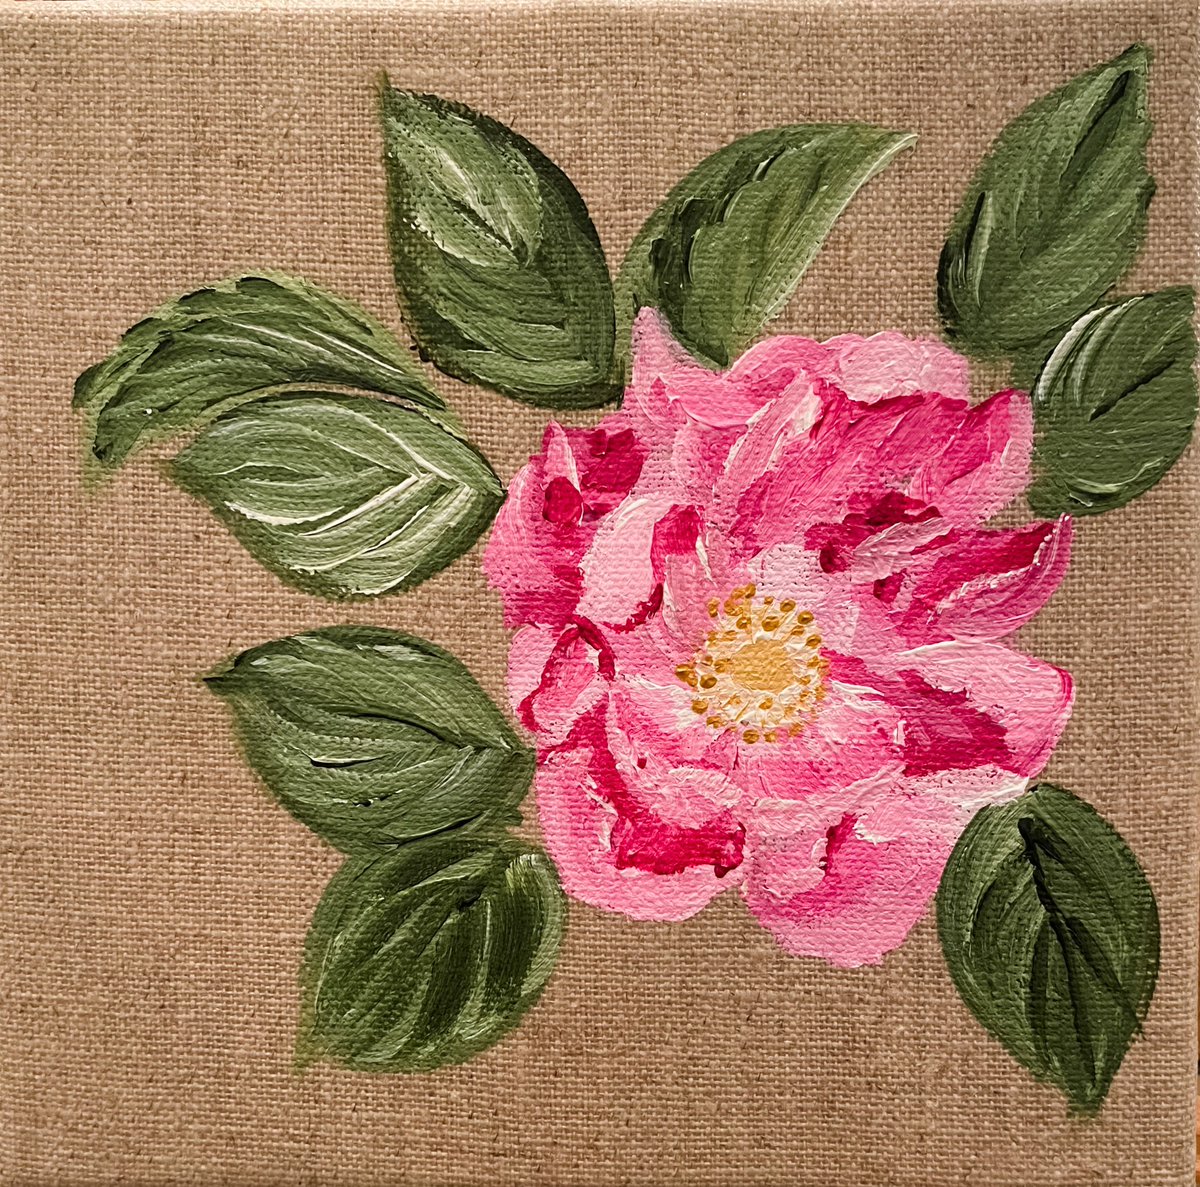 The Tranquility Collection is live! Go to pleindebonte.com/shop to purchase! I have included a bonus painting of this little beach rose. 

#art #released #fineart #contemporaryart #collection #limitedcollection #releaseday #pleindebontestudios